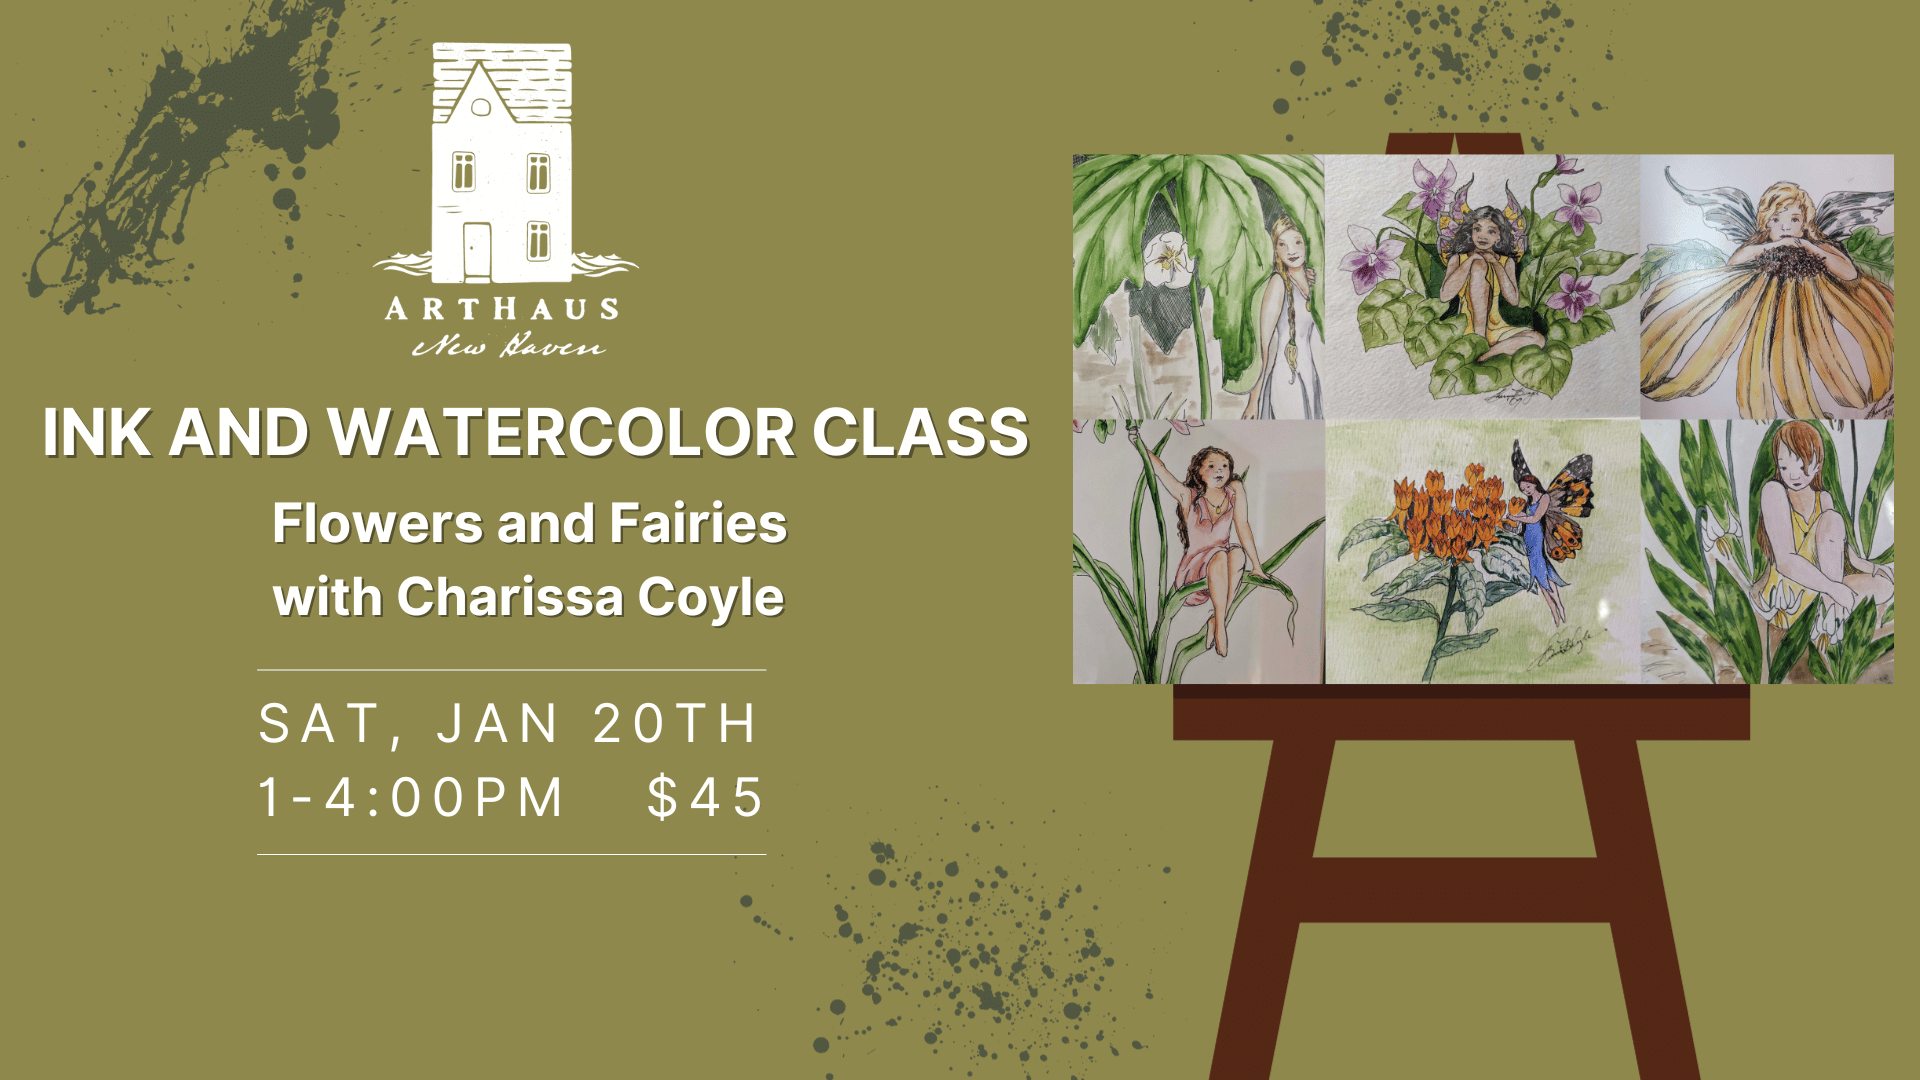 Ink and Watercolor Class with Charissa Coyle